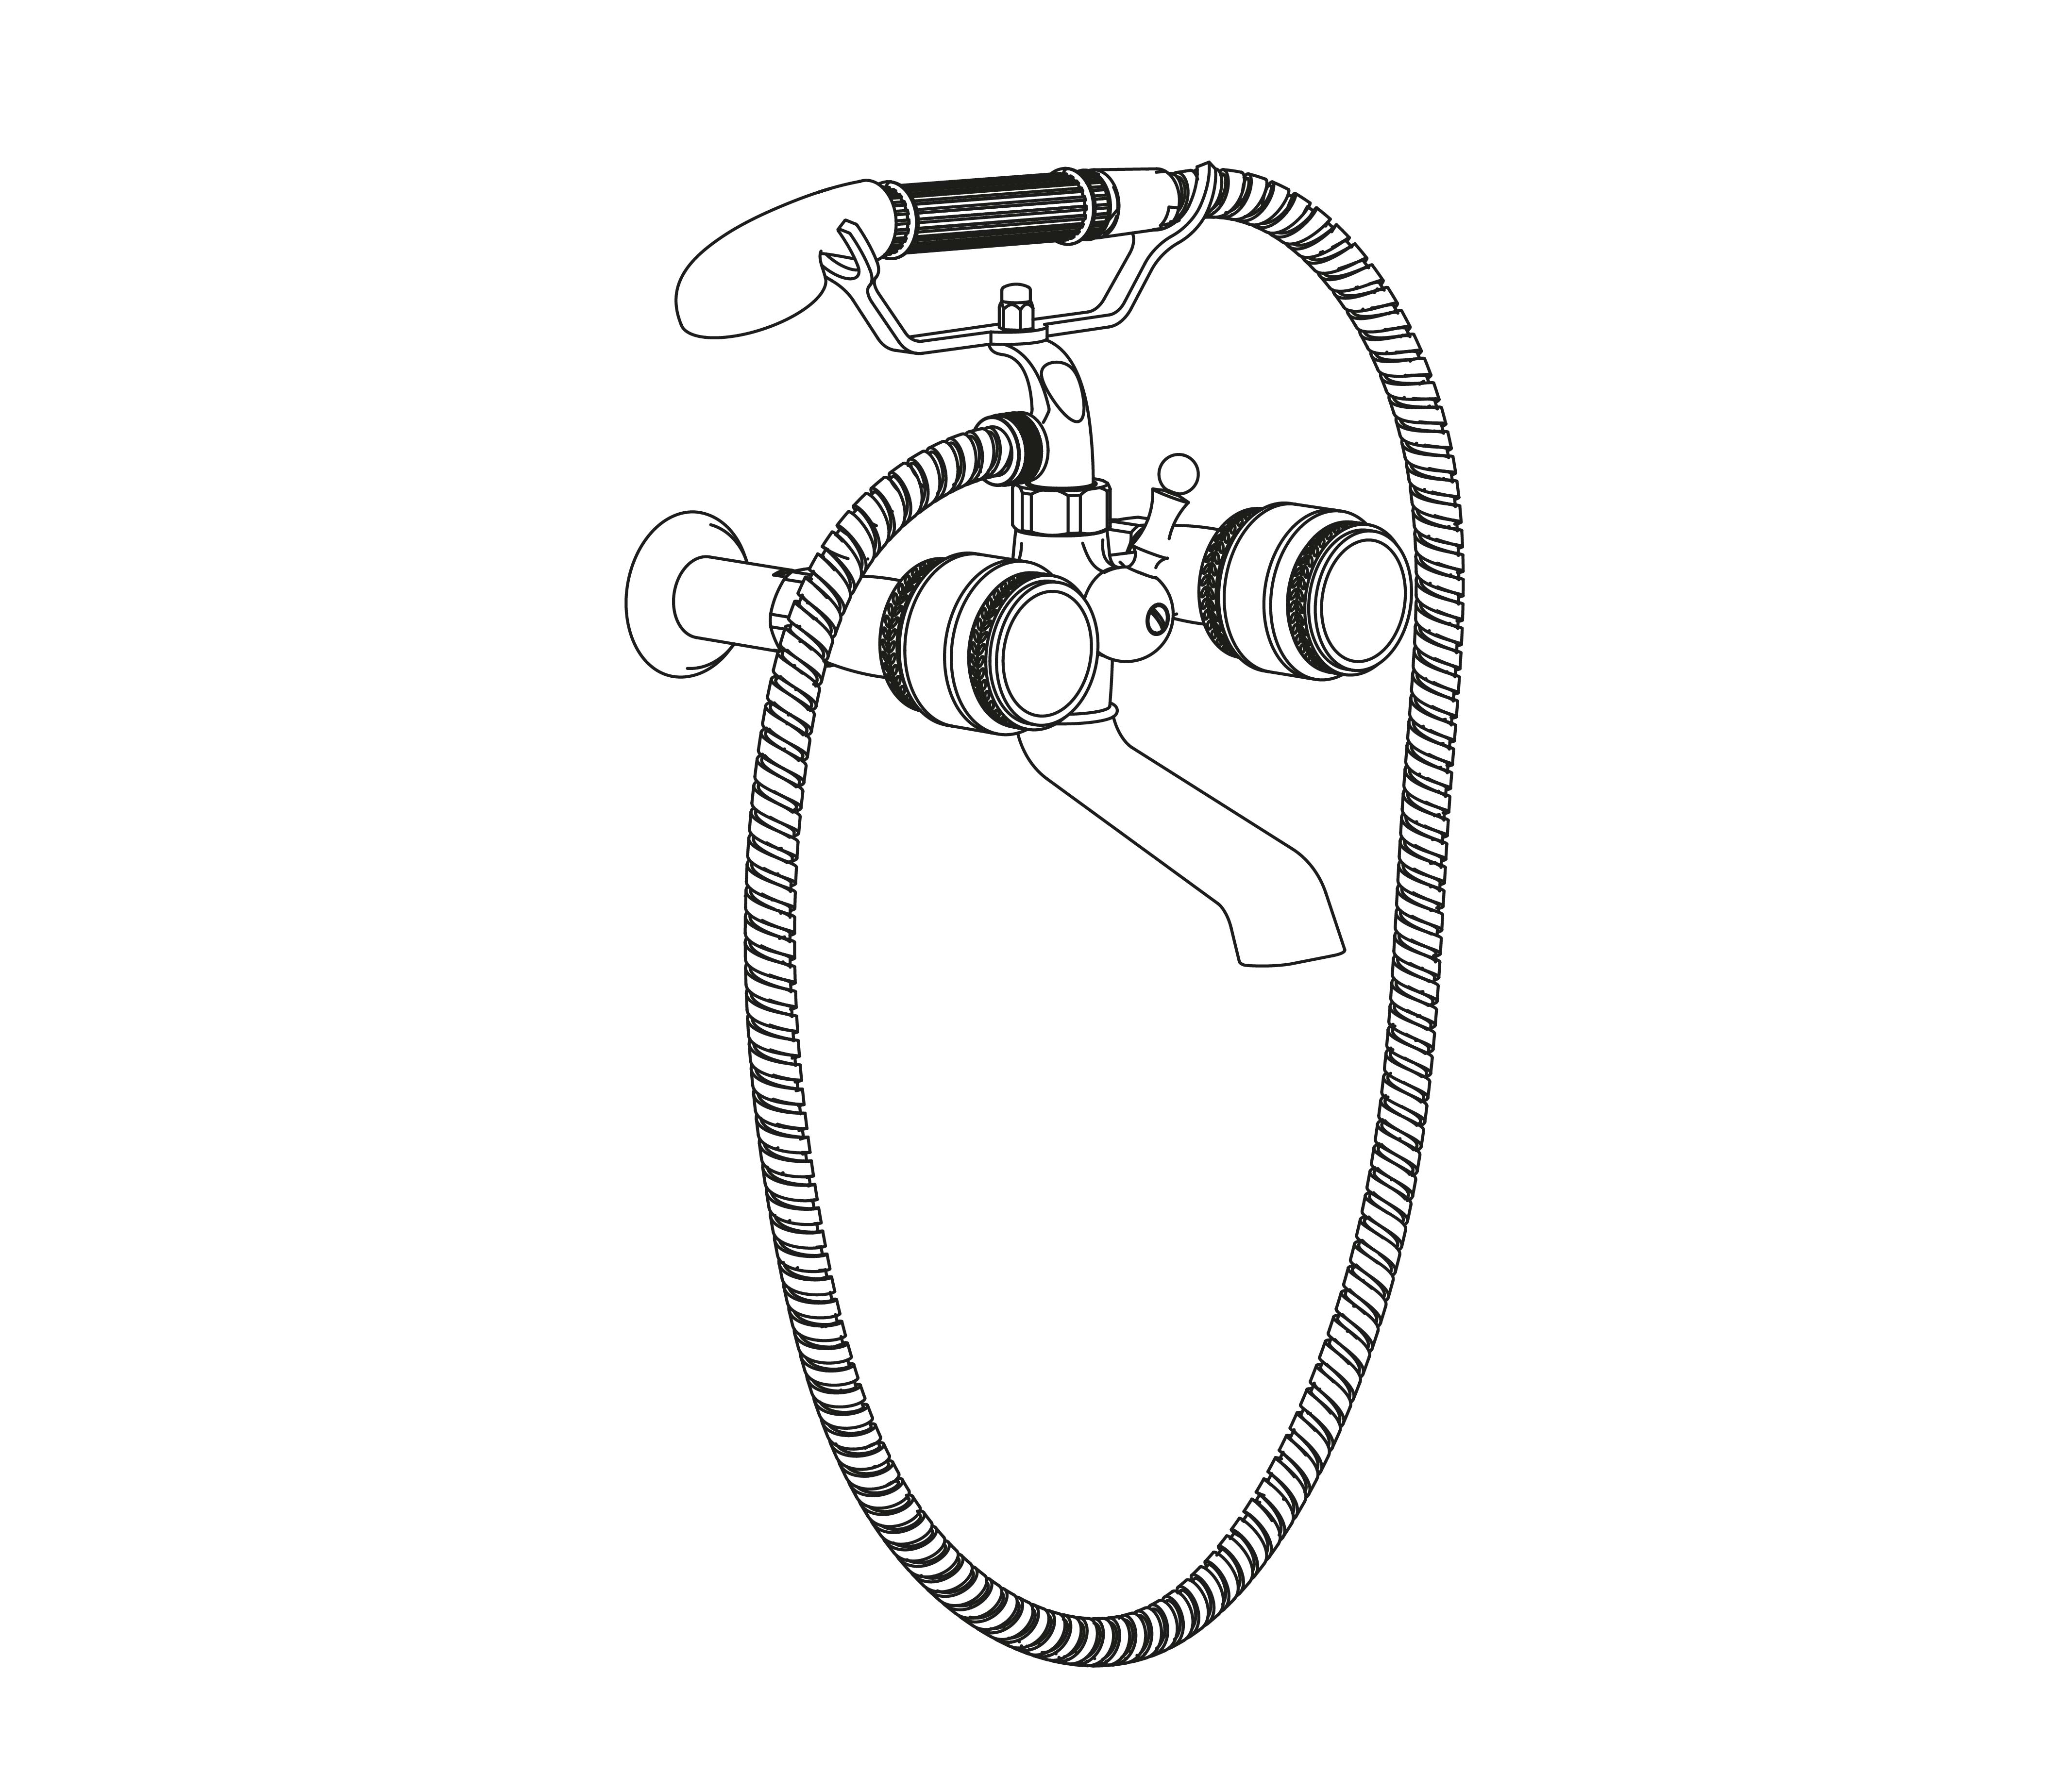 S150-3201 Wall mounted bath and shower mixer